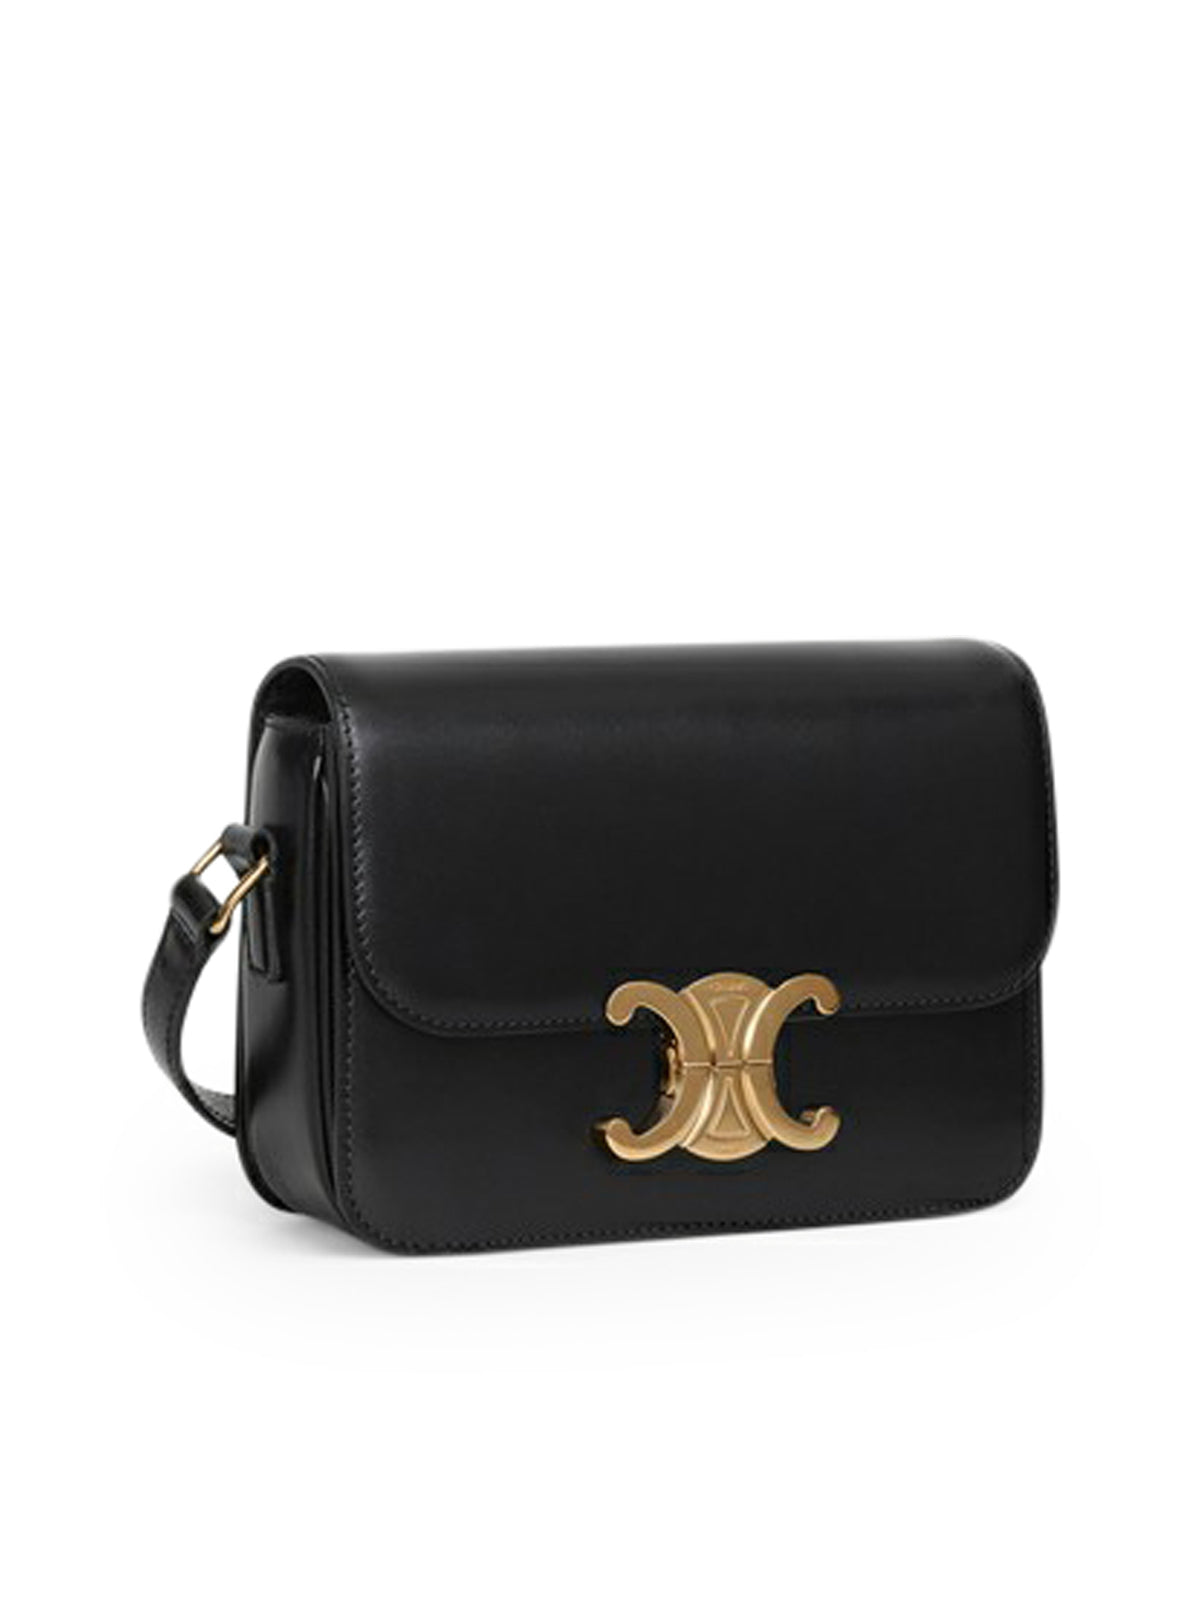 TRIOMPHE TEEN BAG IN SCHWARZ SHINY CALF LEATHER